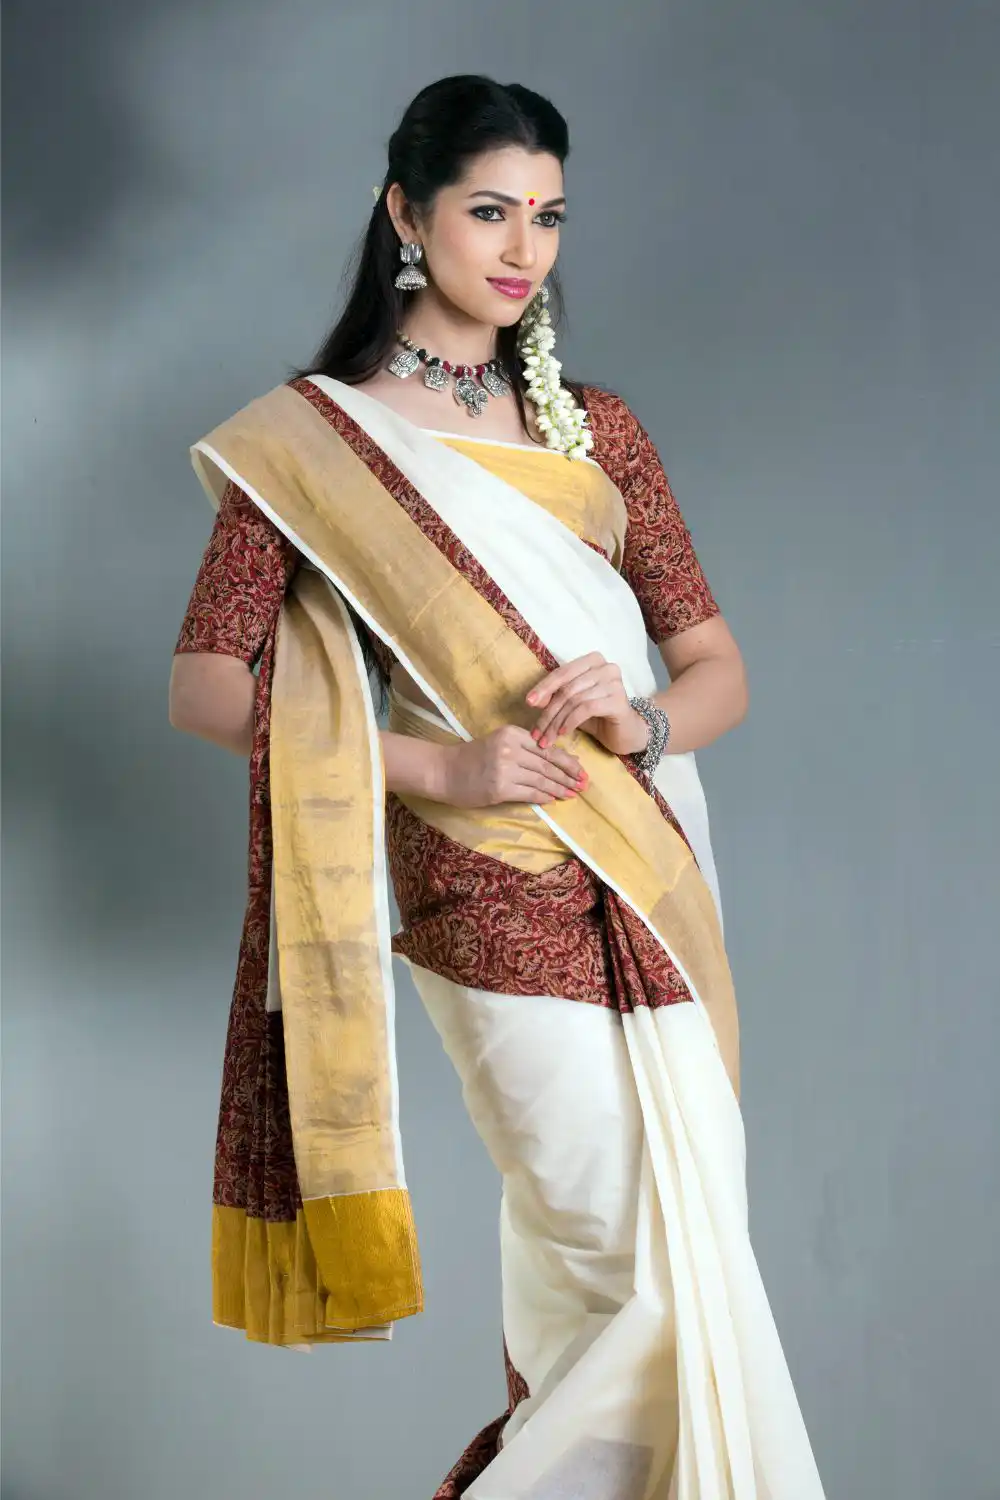 Charming Indian woman in traditional saree